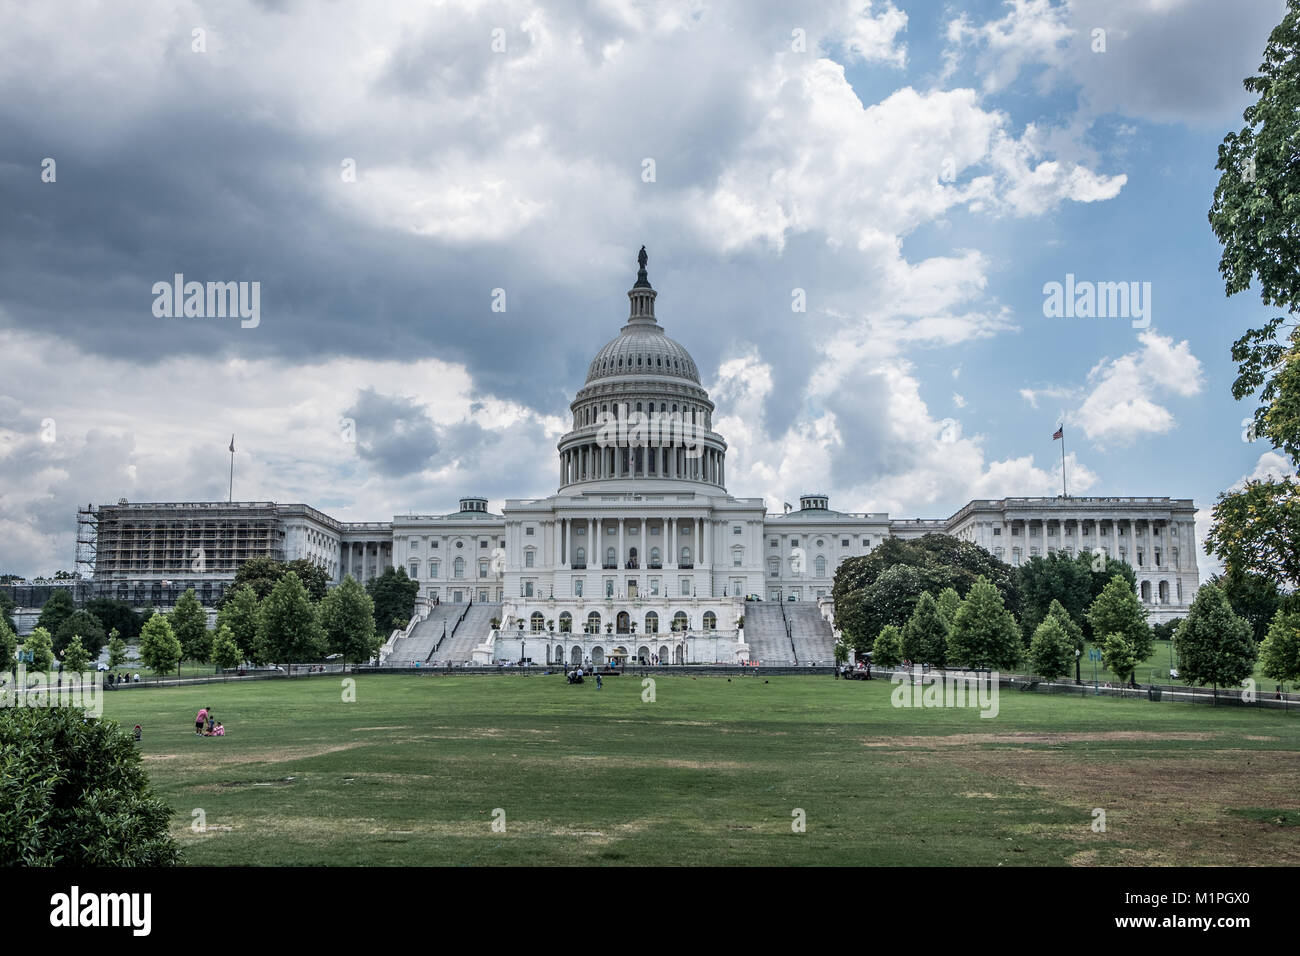 Washington, D.C., United States - June 21, 2017: The famous Capitol building, which is home of the United States Congress and the seat of the legislative branch of the U.S. federal government. Stock Photo